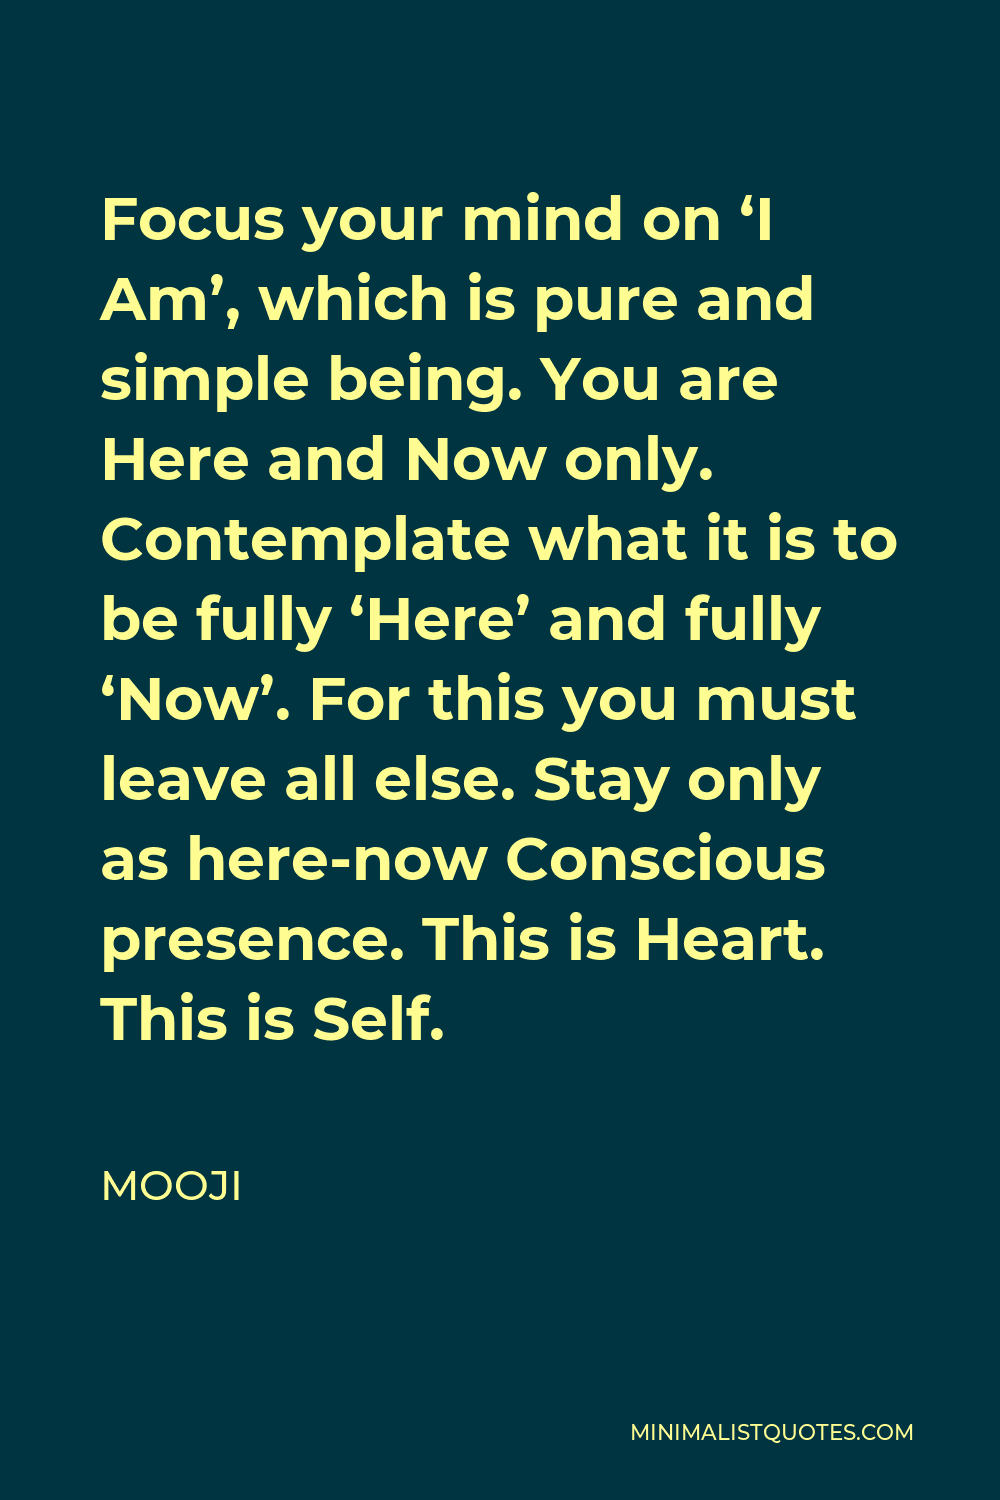 Mooji Quote - Focus your mind on ‘I Am’, which is pure and simple being. You are Here and Now only. Contemplate what it is to be fully ‘Here’ and fully ‘Now’. For this you must leave all else. Stay only as here-now Conscious presence. This is Heart. This is Self.